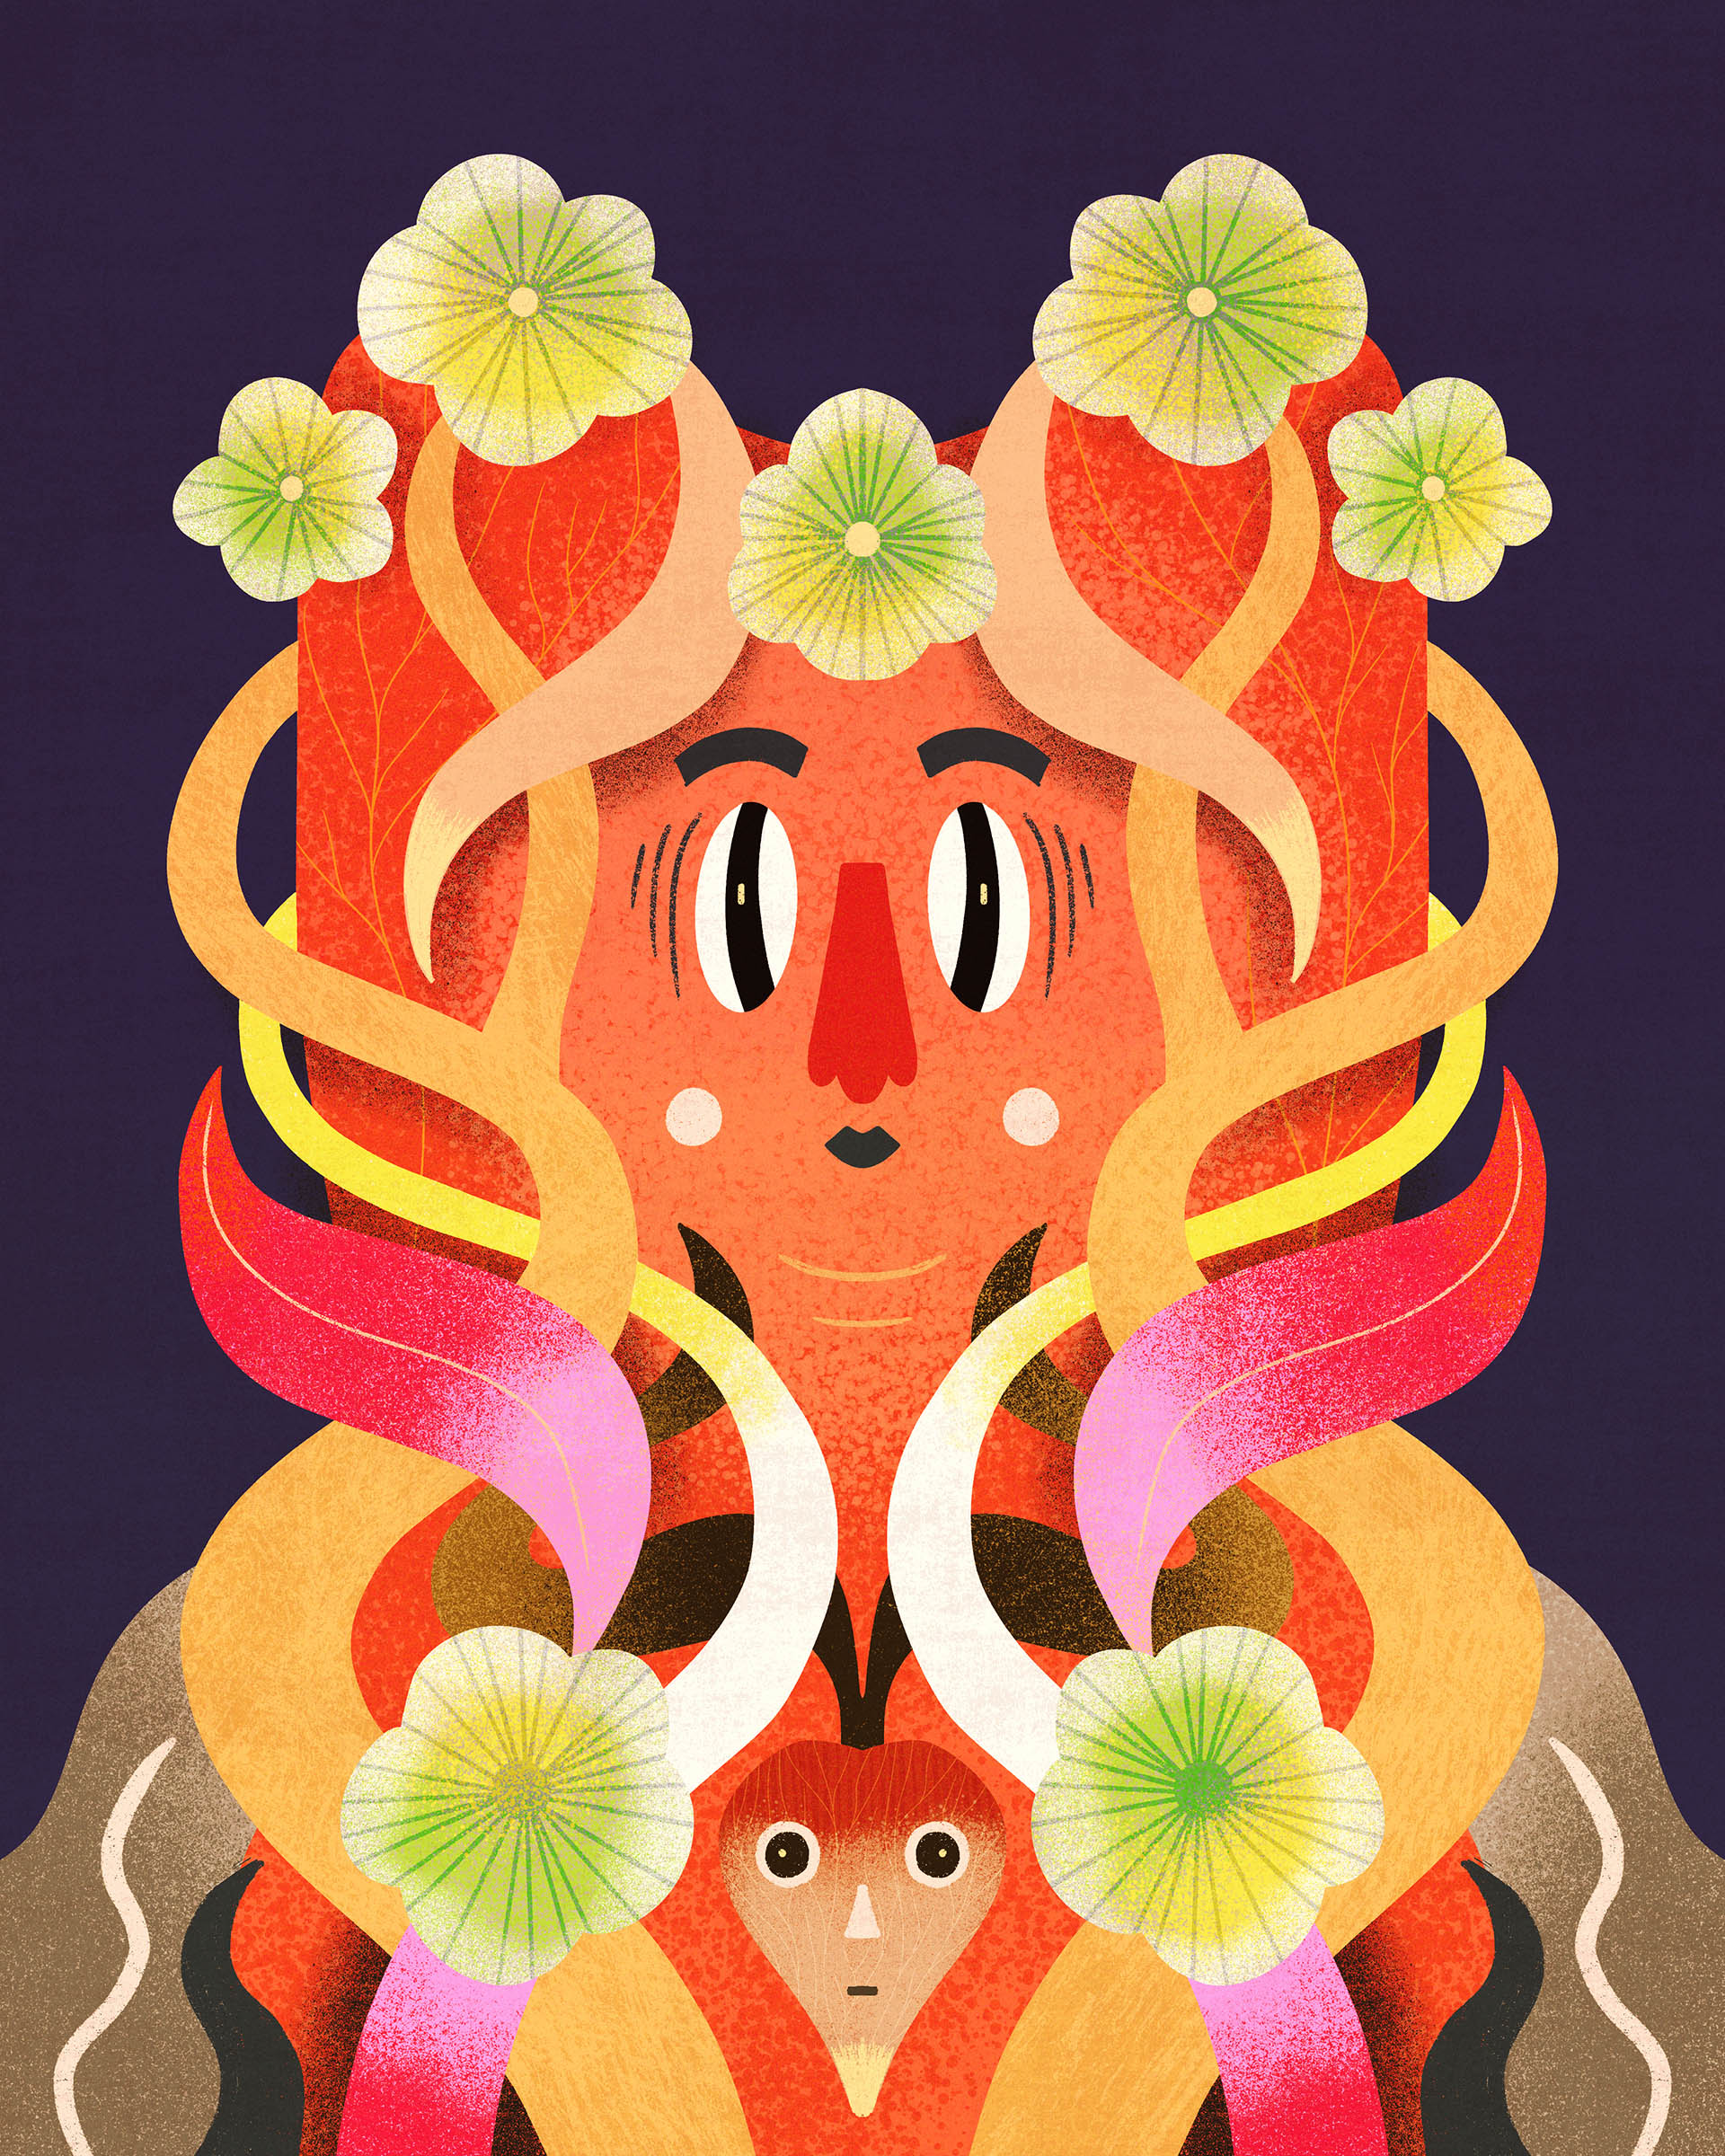 Creature with big ears covered in branches, flowers and leaves.